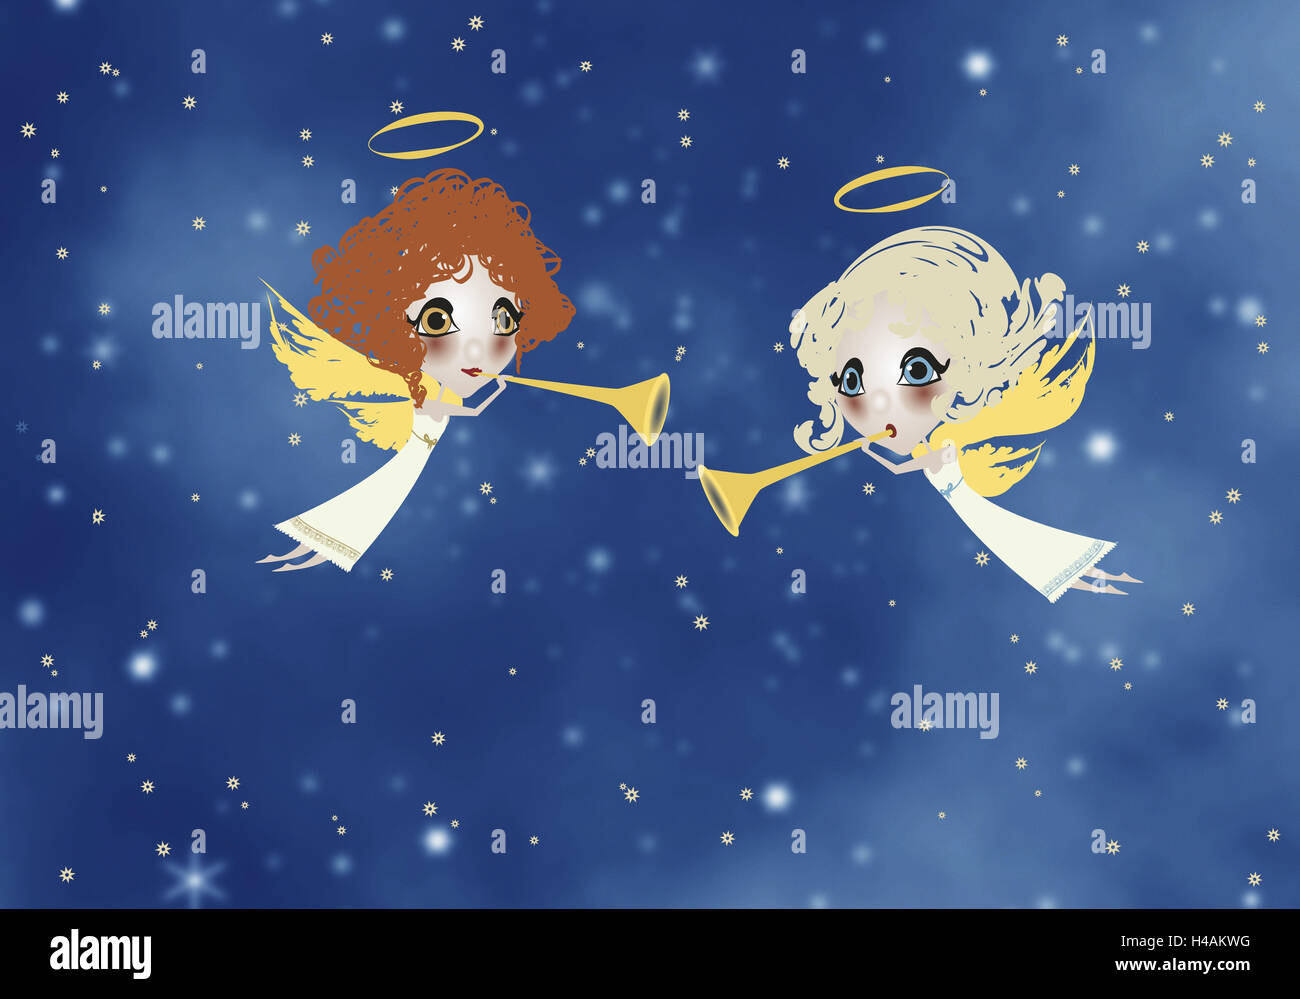 Illustration, heaven, angel, two, blond, red-haired, trumpets, graphics, stars, starry skystarry skystarry skies, heaven beings, figures, little angels, for Christmas, heavenly, halo, wing, fly, play music, musician, there make music, trombones, together, Stock Photo